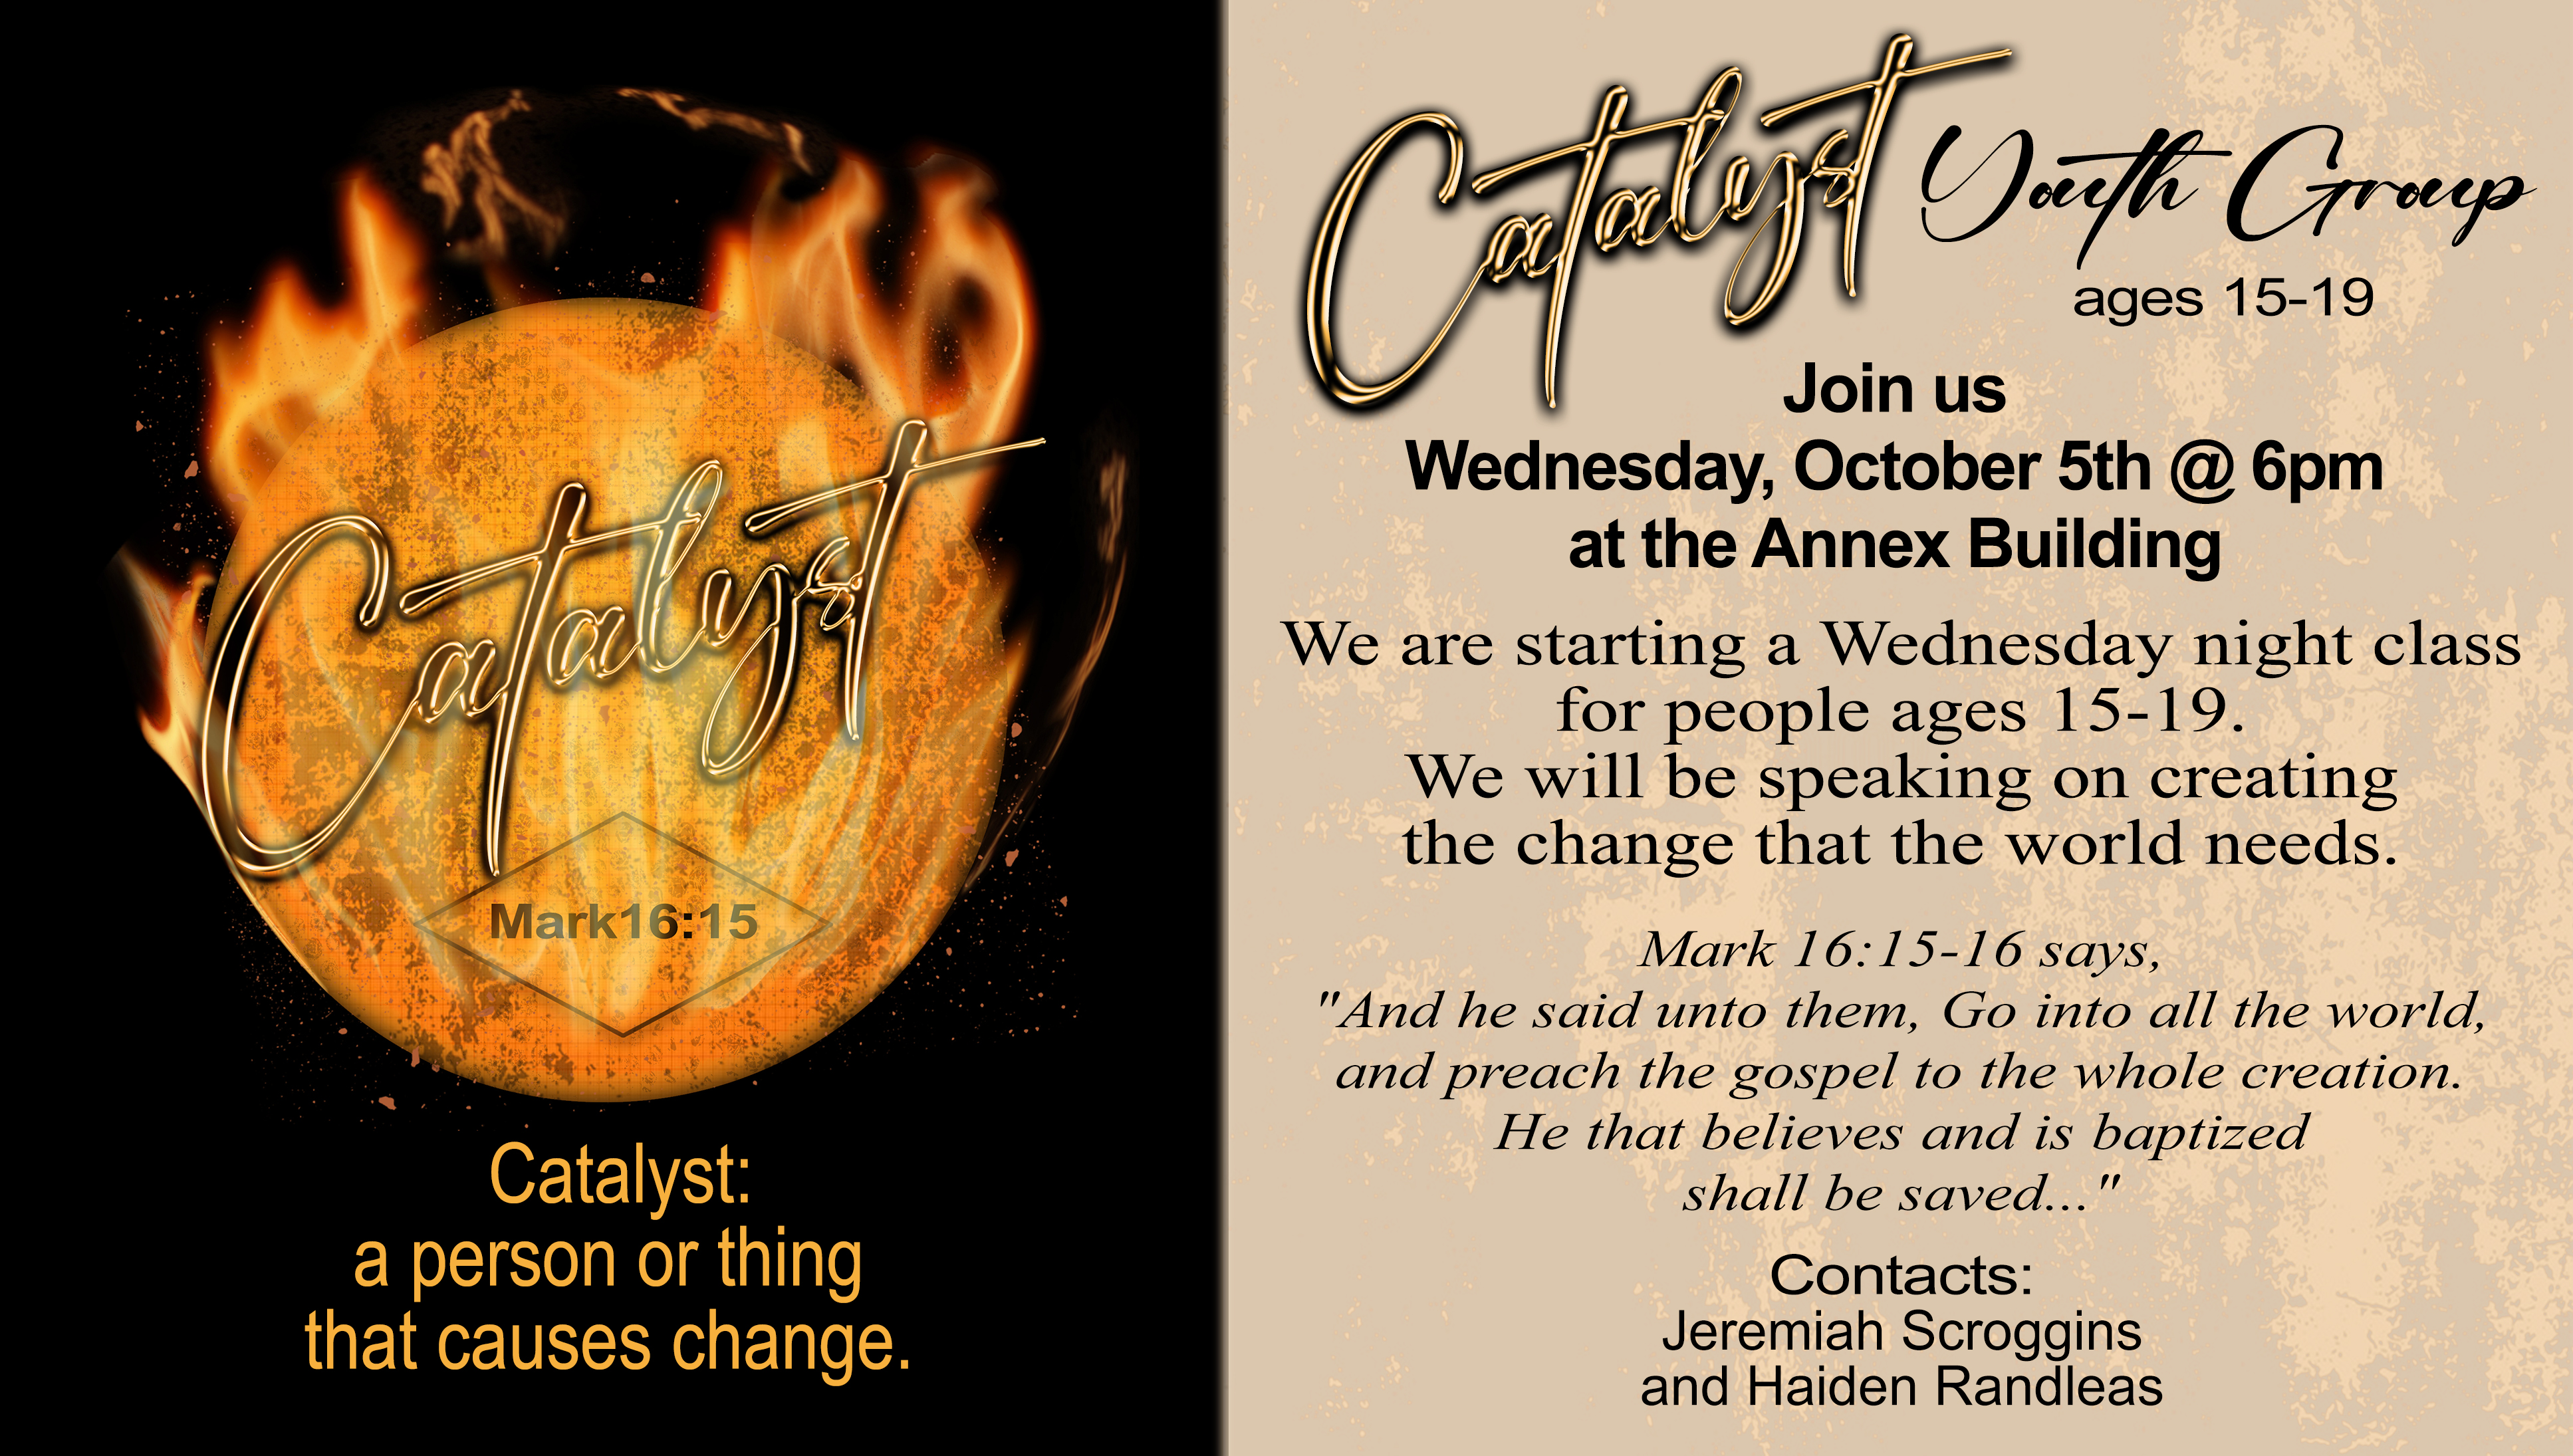 PP_Catalyst Youth Group_AD copy.jpg